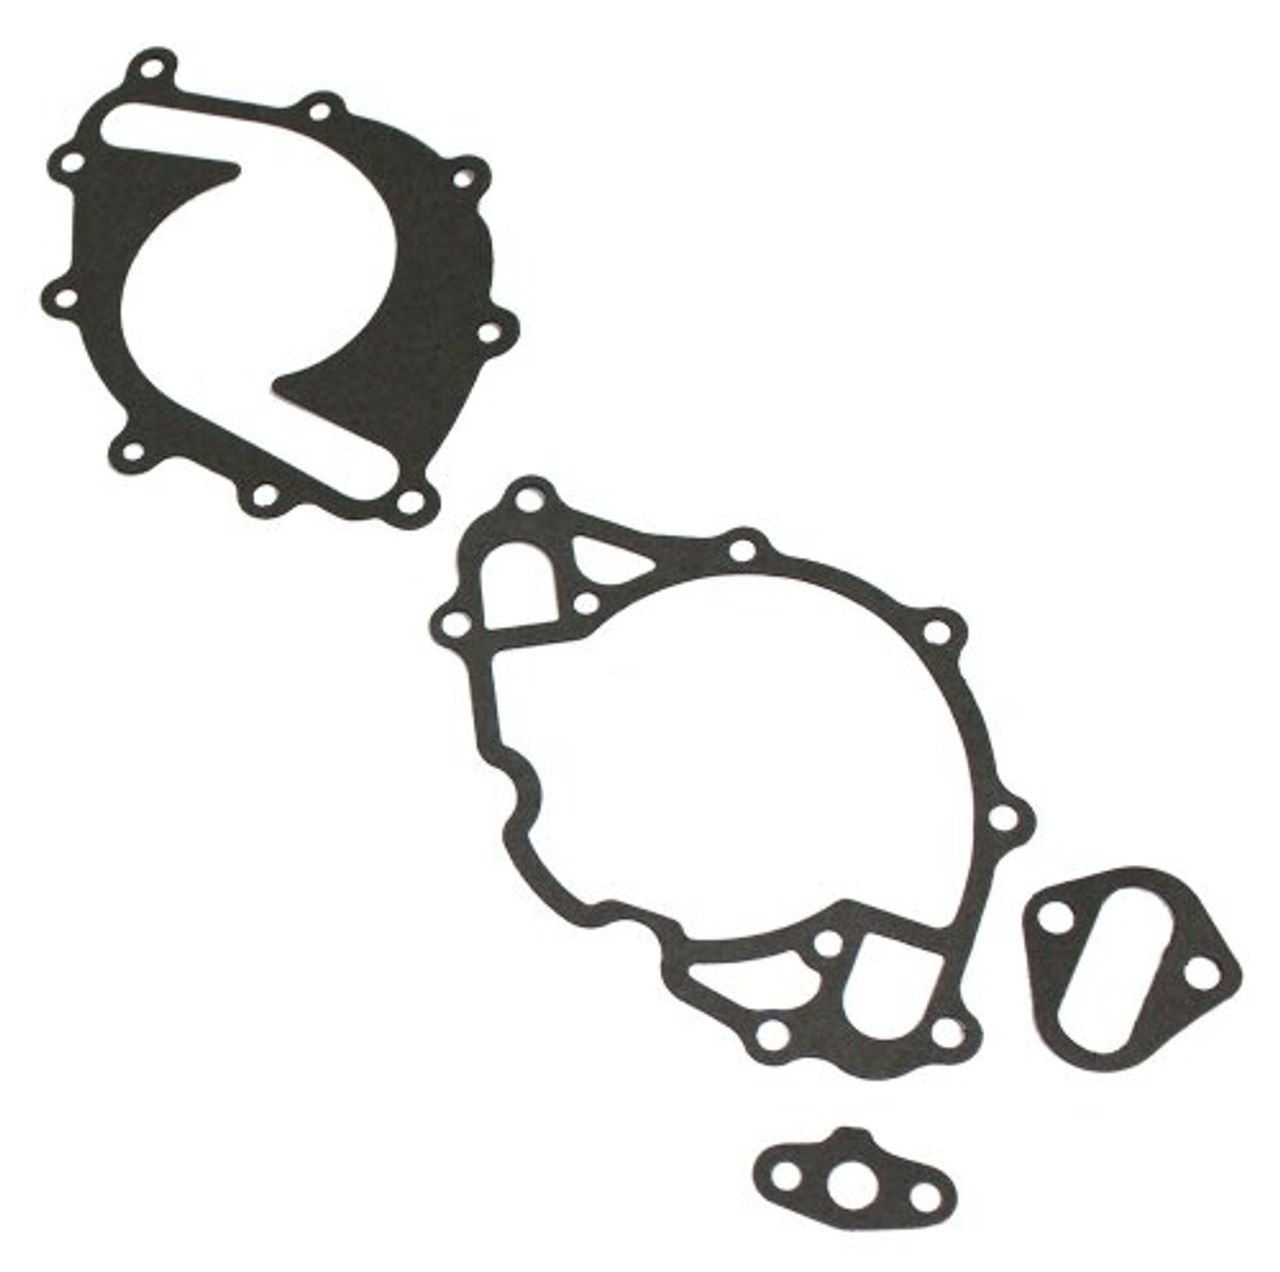 Lower Gasket Set - 1987 Lincoln Continental 5.0L Engine Parts # LGS4113ZE102